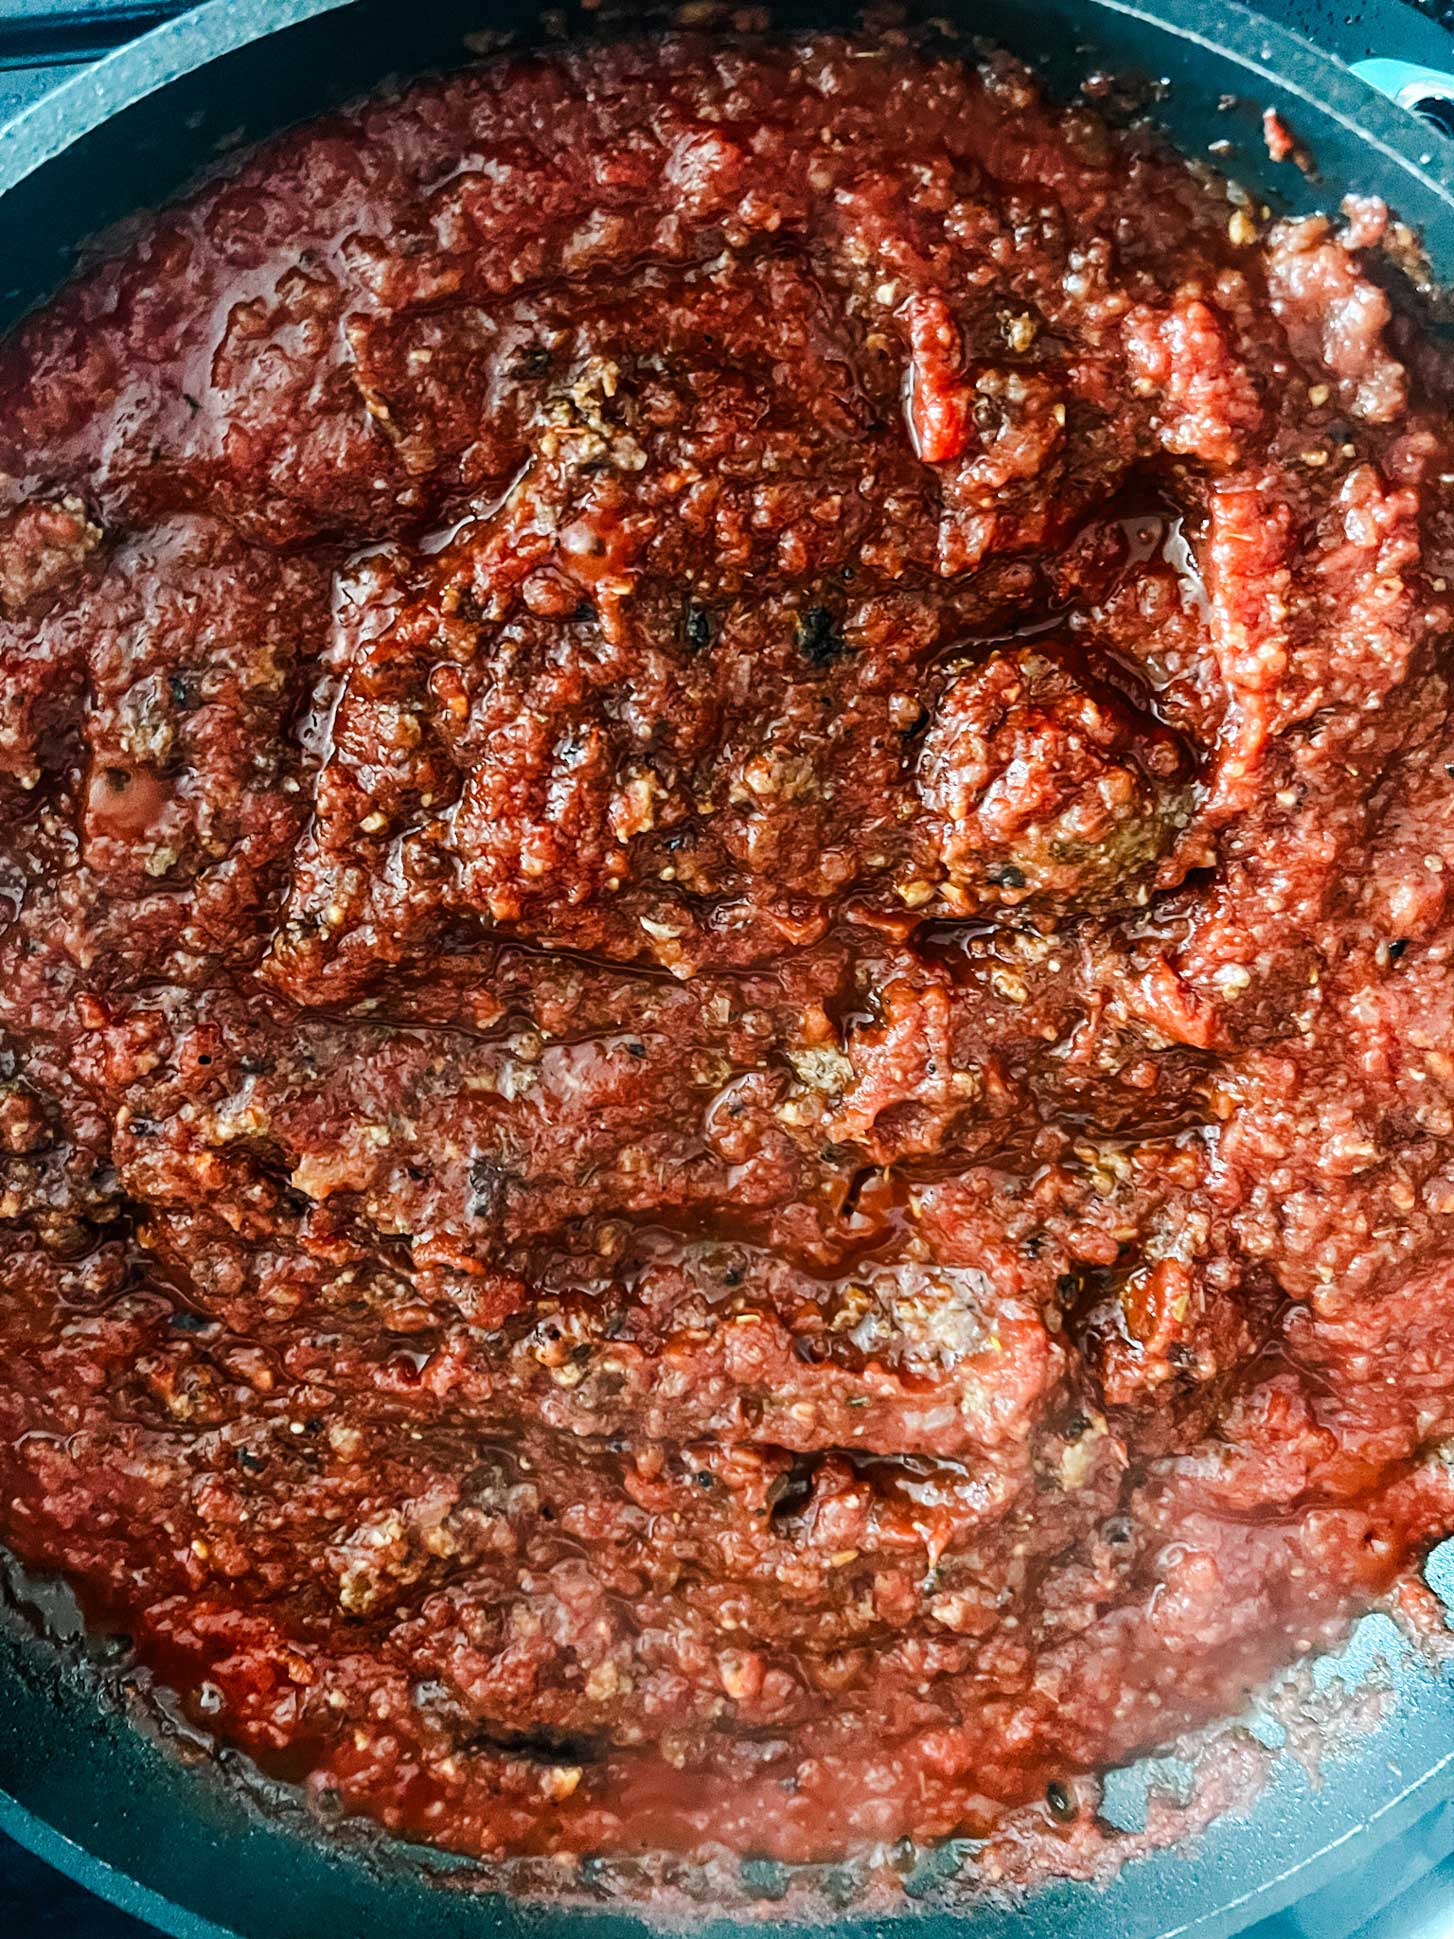 Meatsauce in a large skillet.